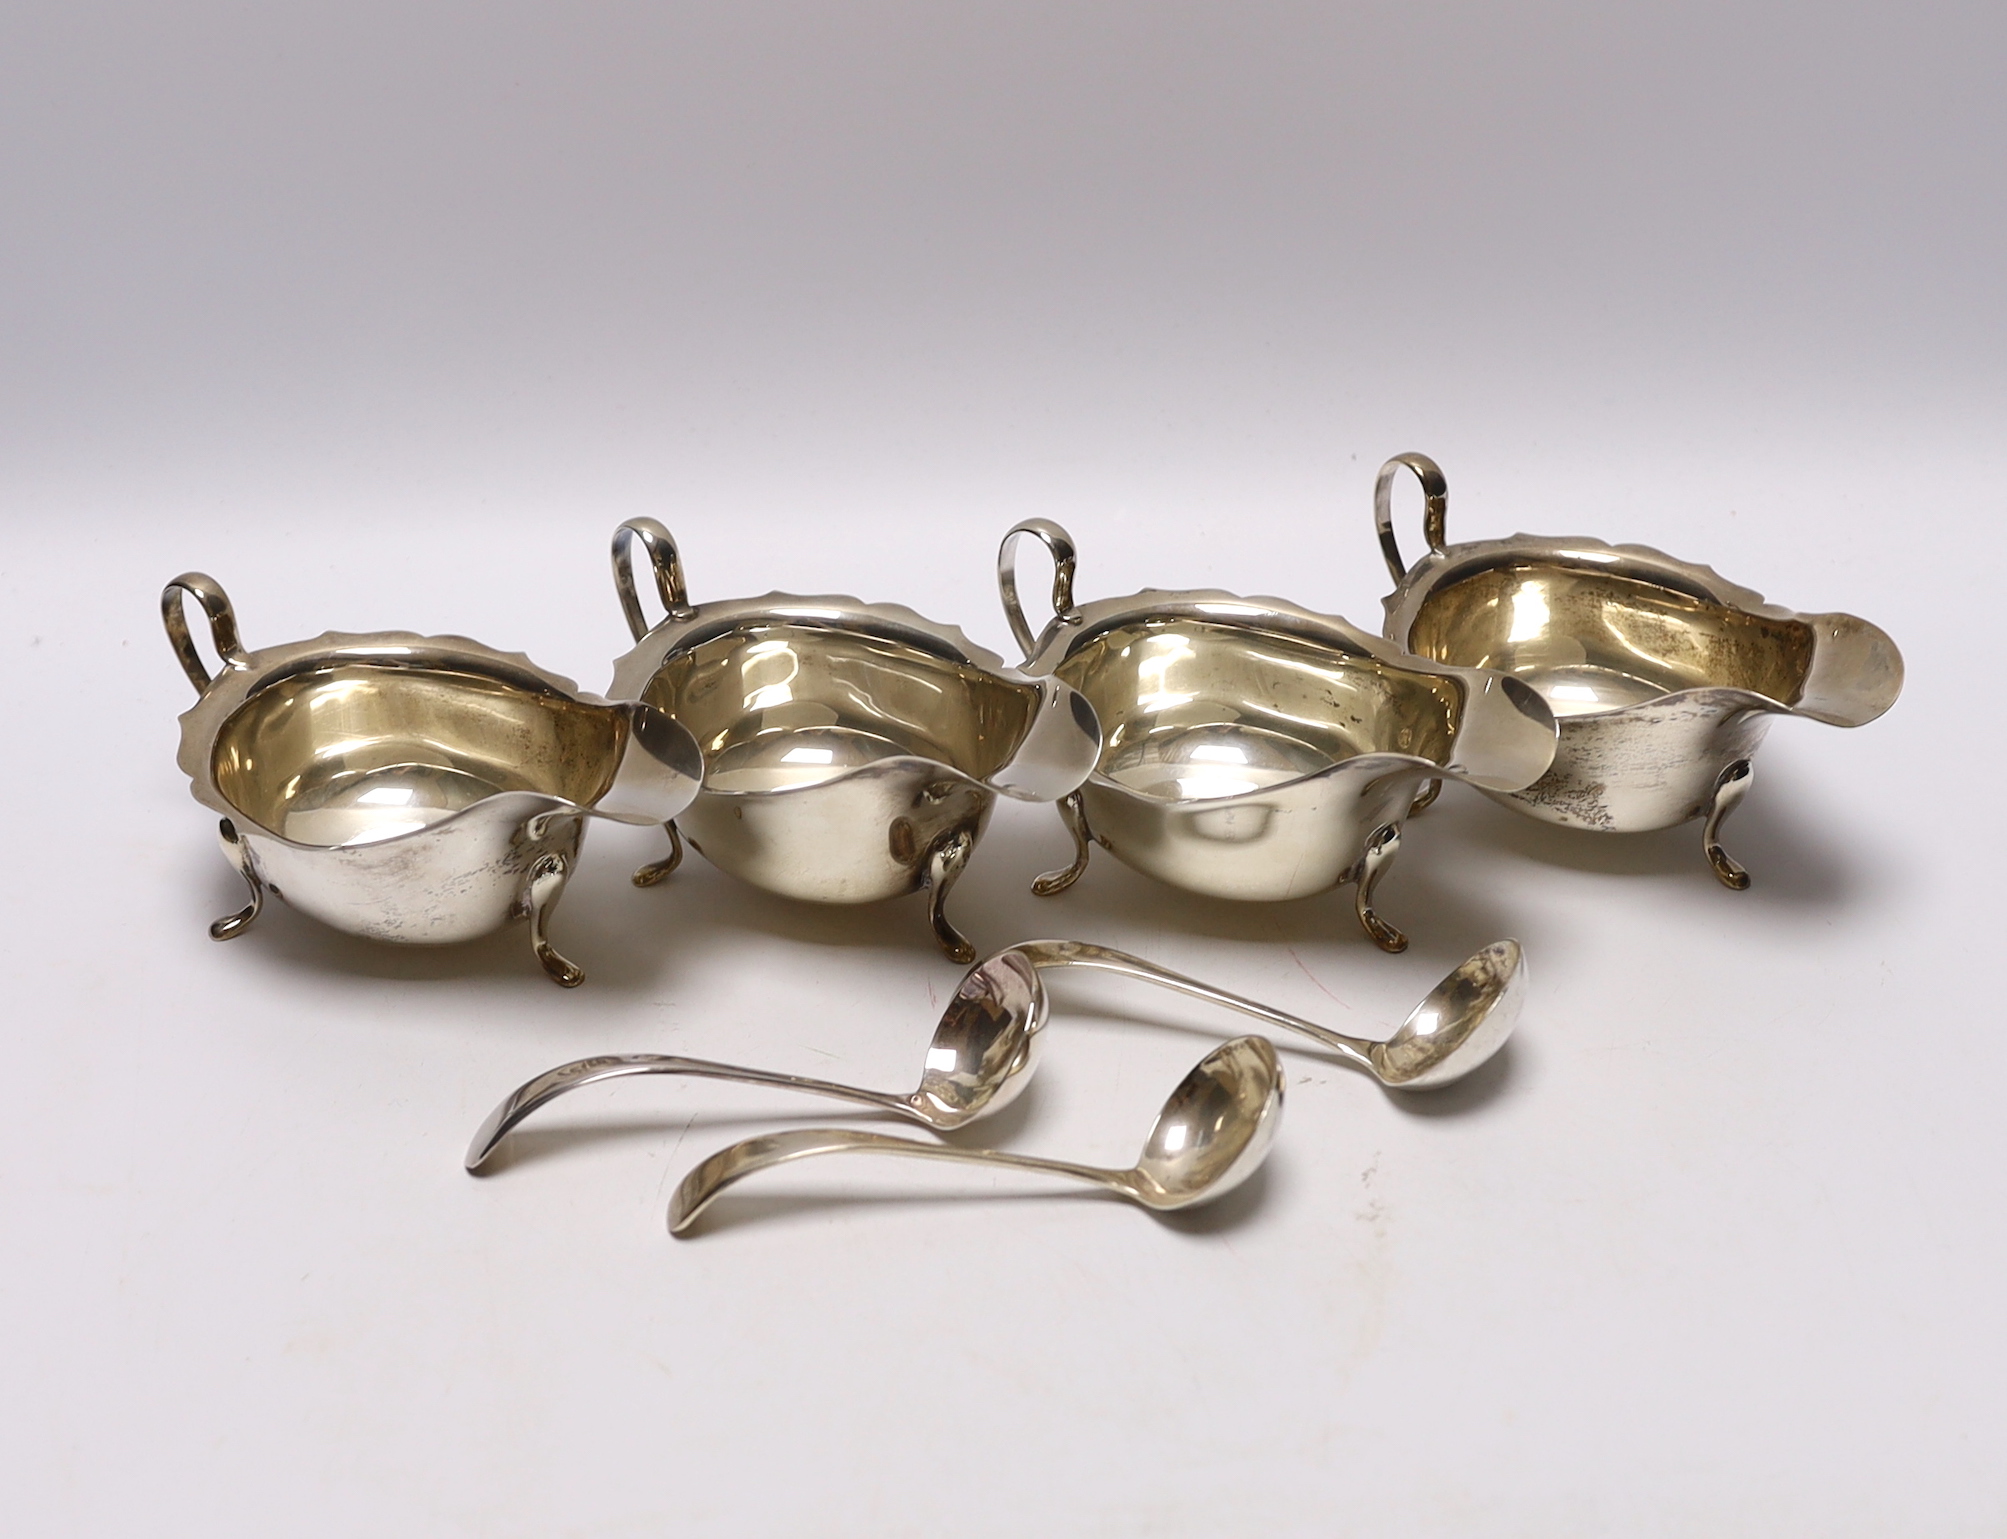 A set of three George VI silver sauceboats, Viners Ltd, Sheffield, 1937, together with three ladles (two silver) and one other silver sauceboat, 16.1oz.                                                                    